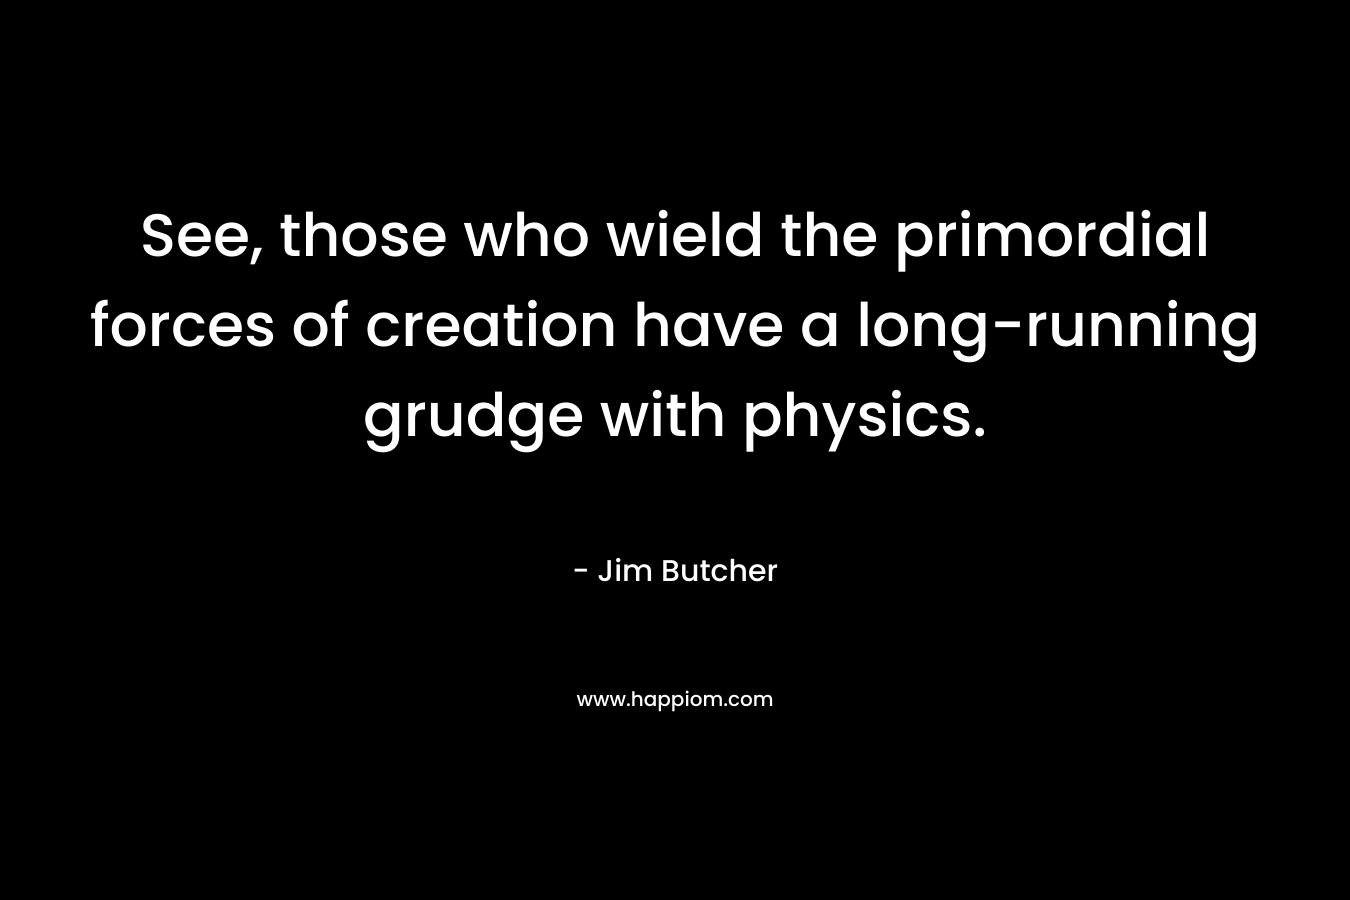 See, those who wield the primordial forces of creation have a long-running grudge with physics.